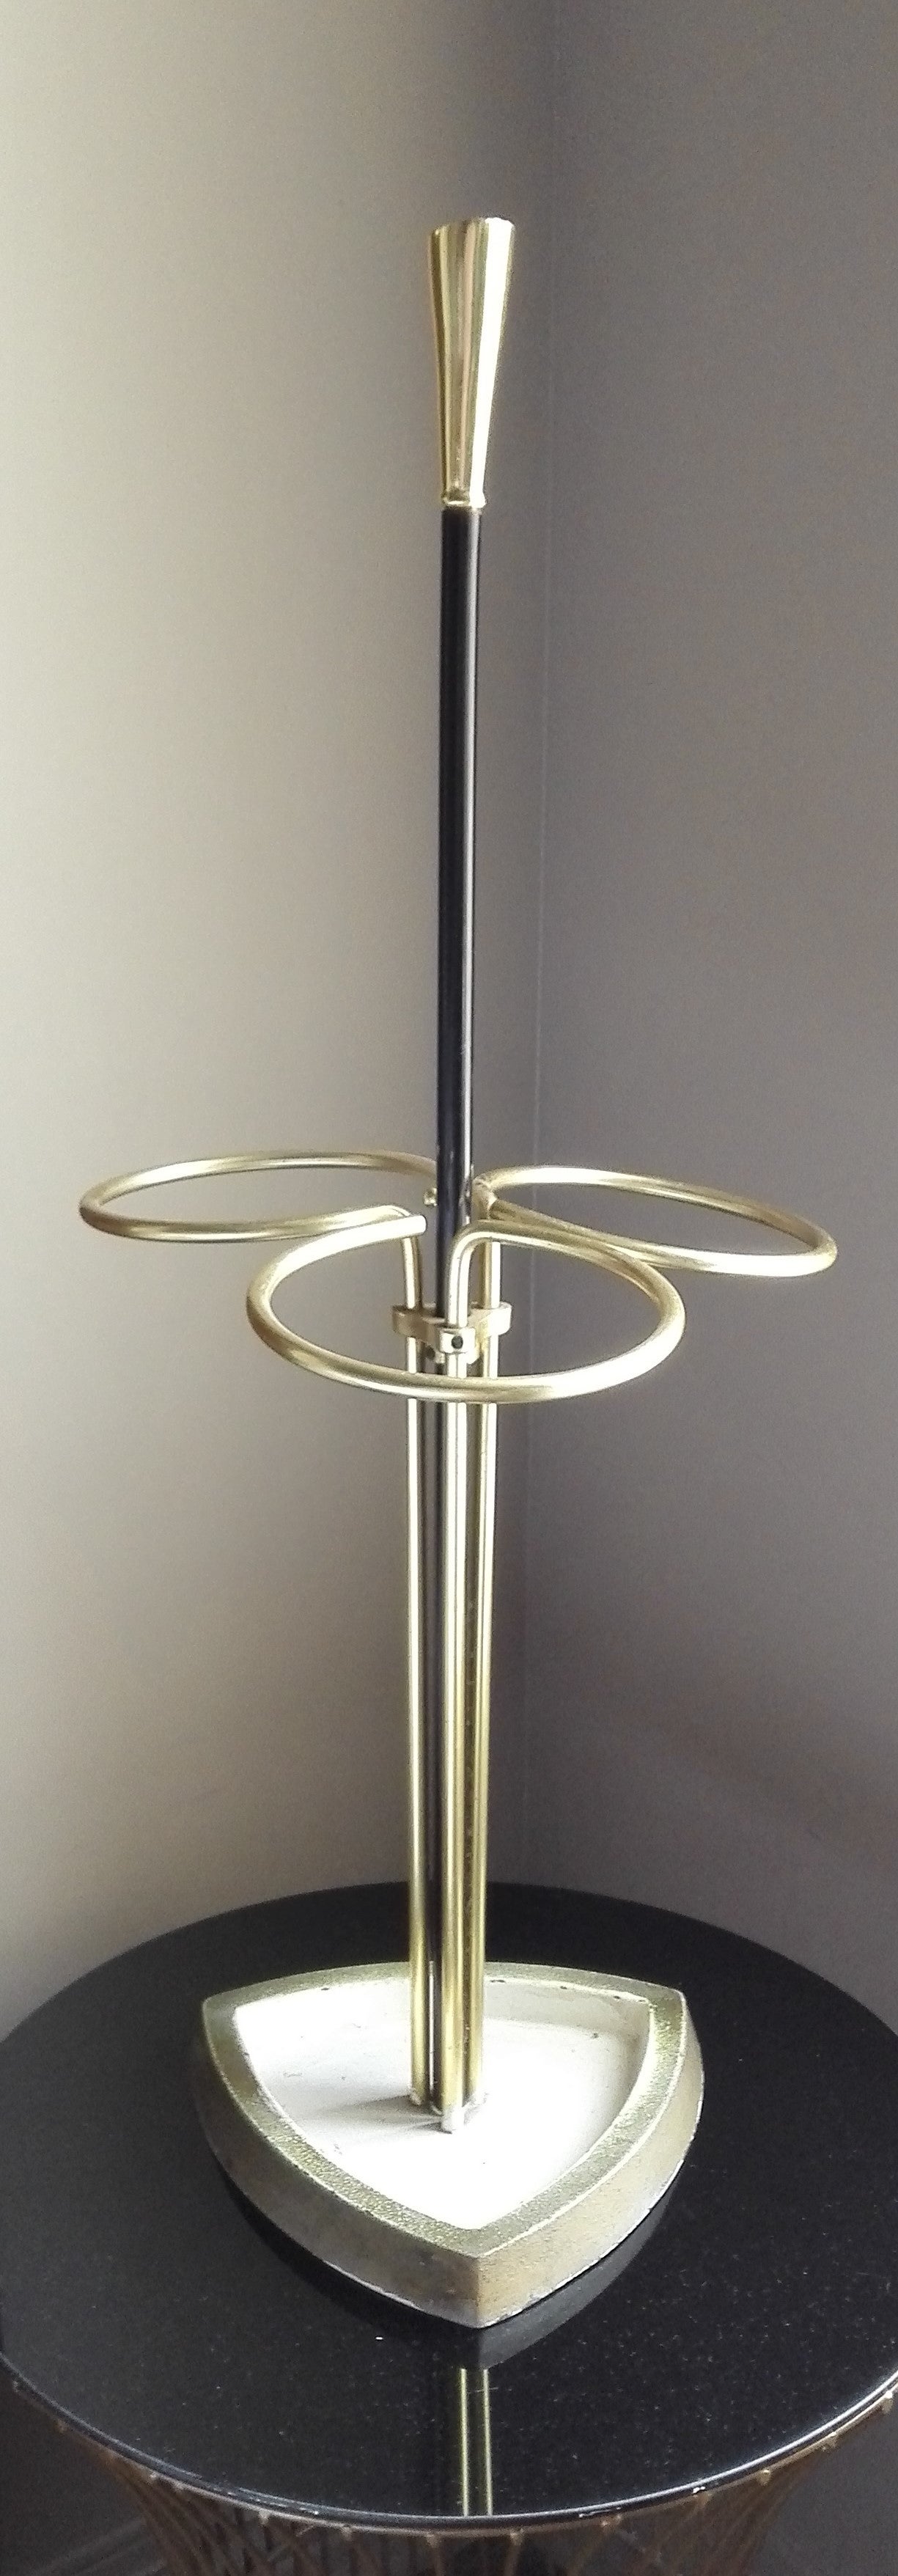 brass, lacquered steel and cast iron umbrella stand
handle very slightly bent
else in very good vintage condition